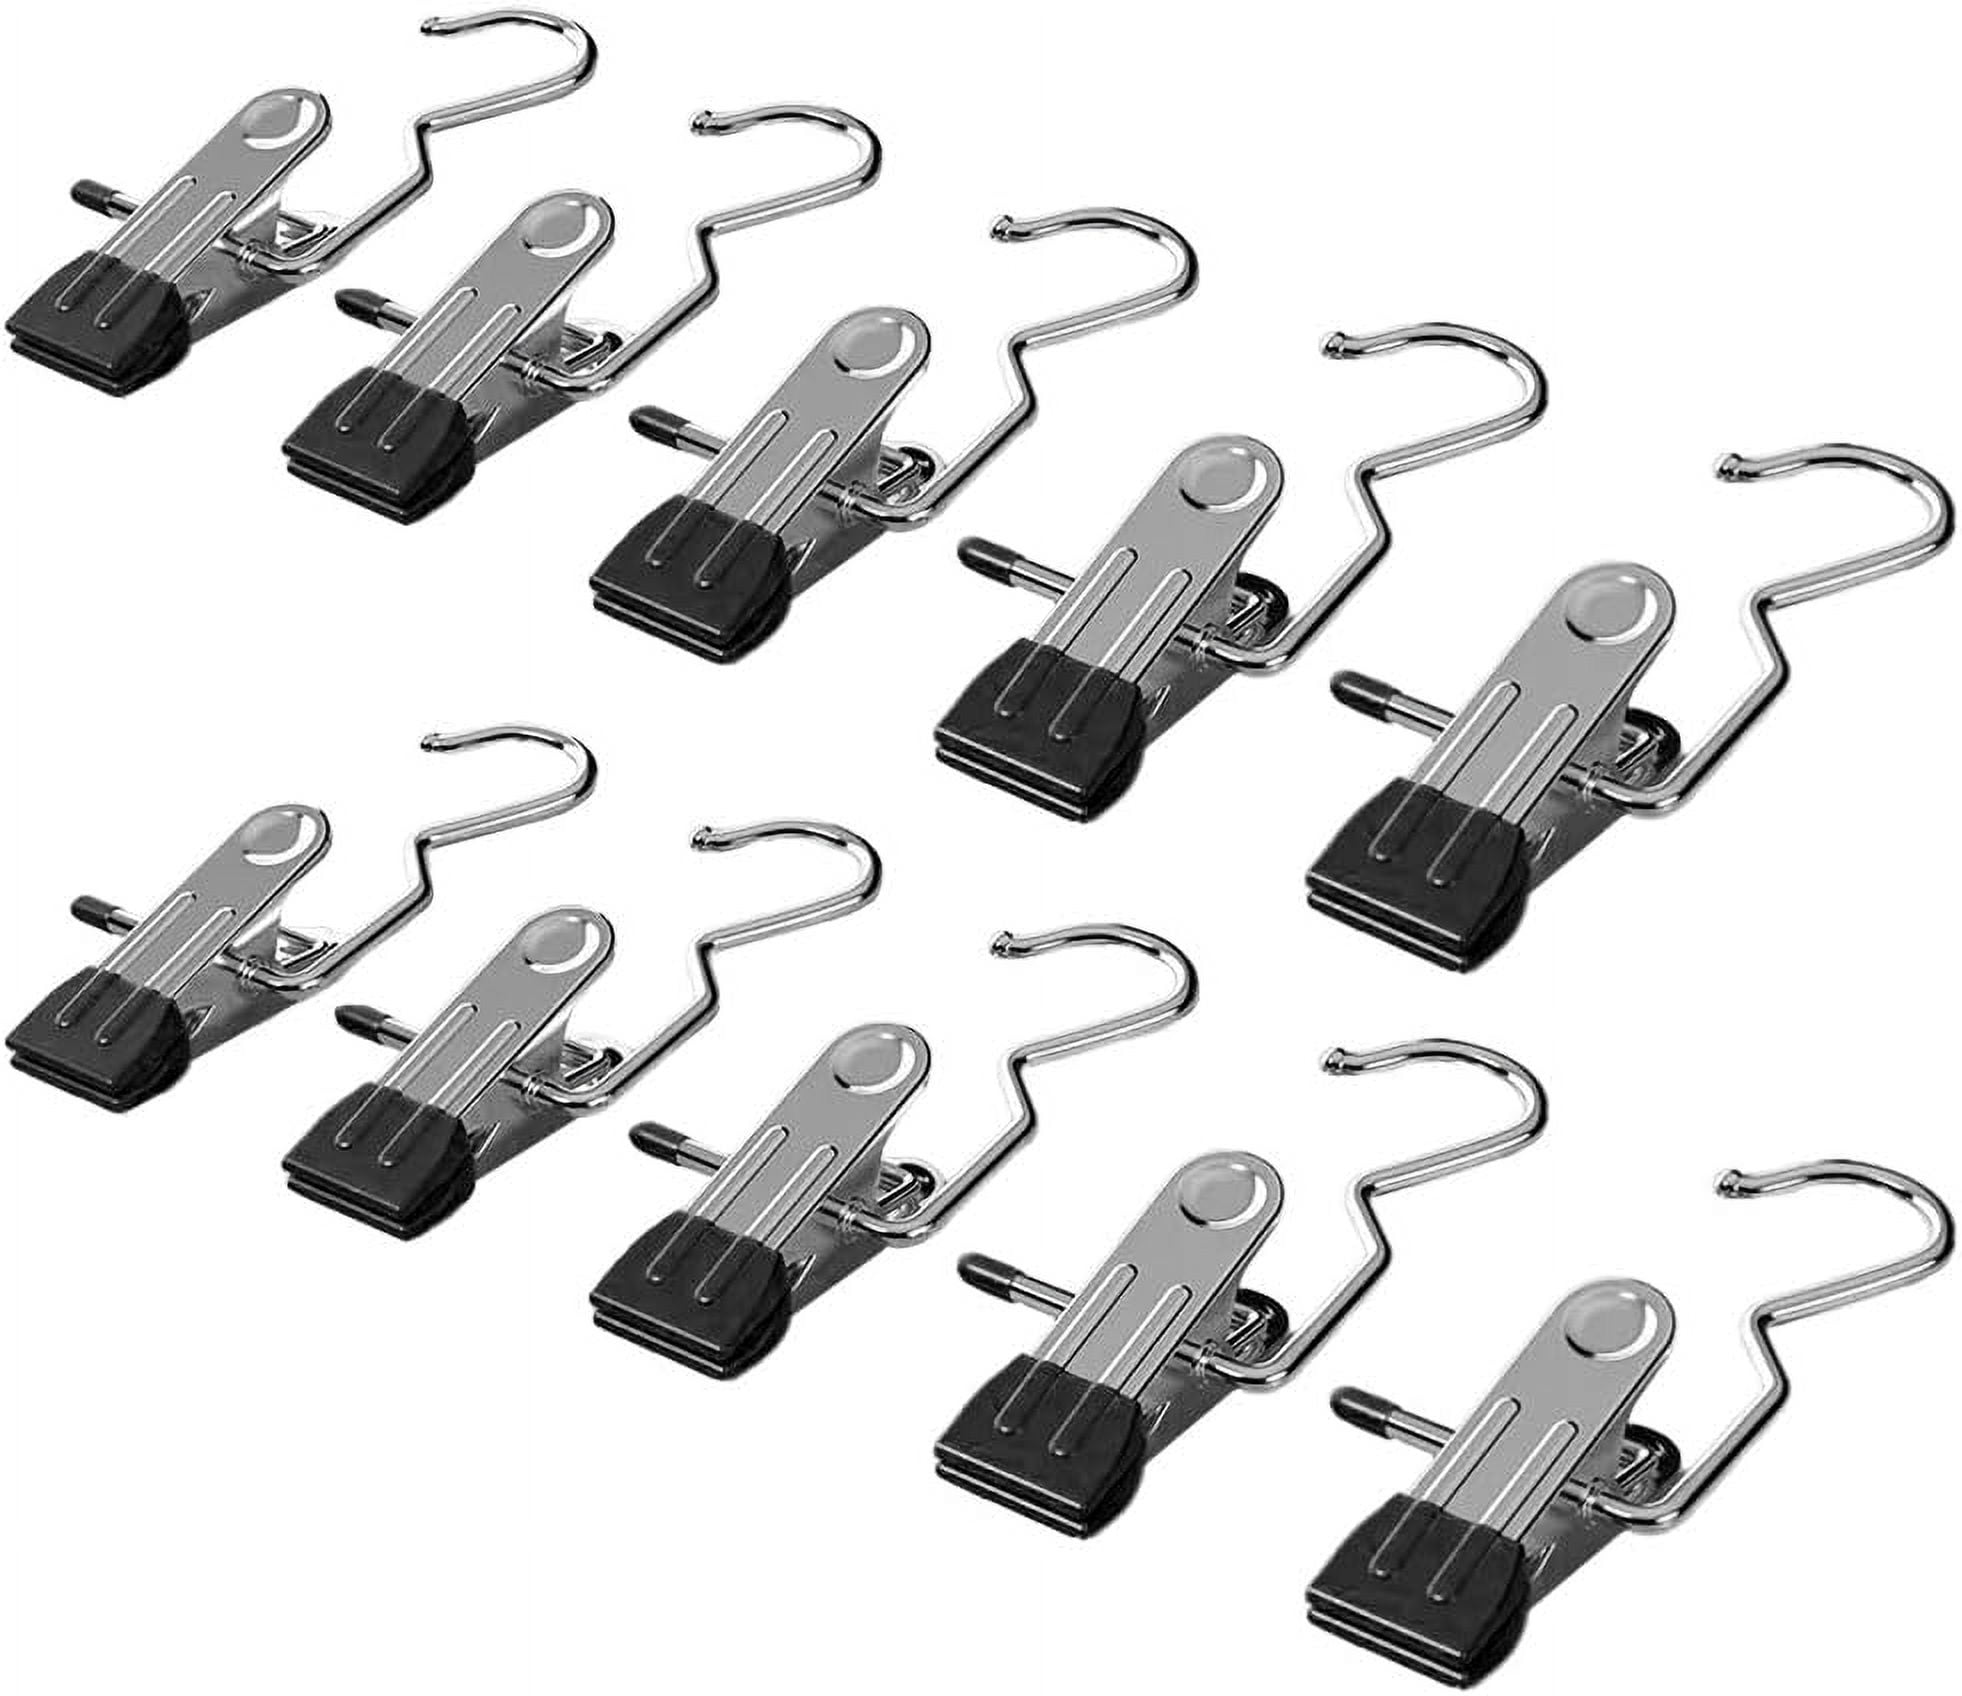 AllTopBargains 24 PC Laundry Hanging Clothespins Hanger Clothes Pins Clips Pegs Heavy Duty Grip